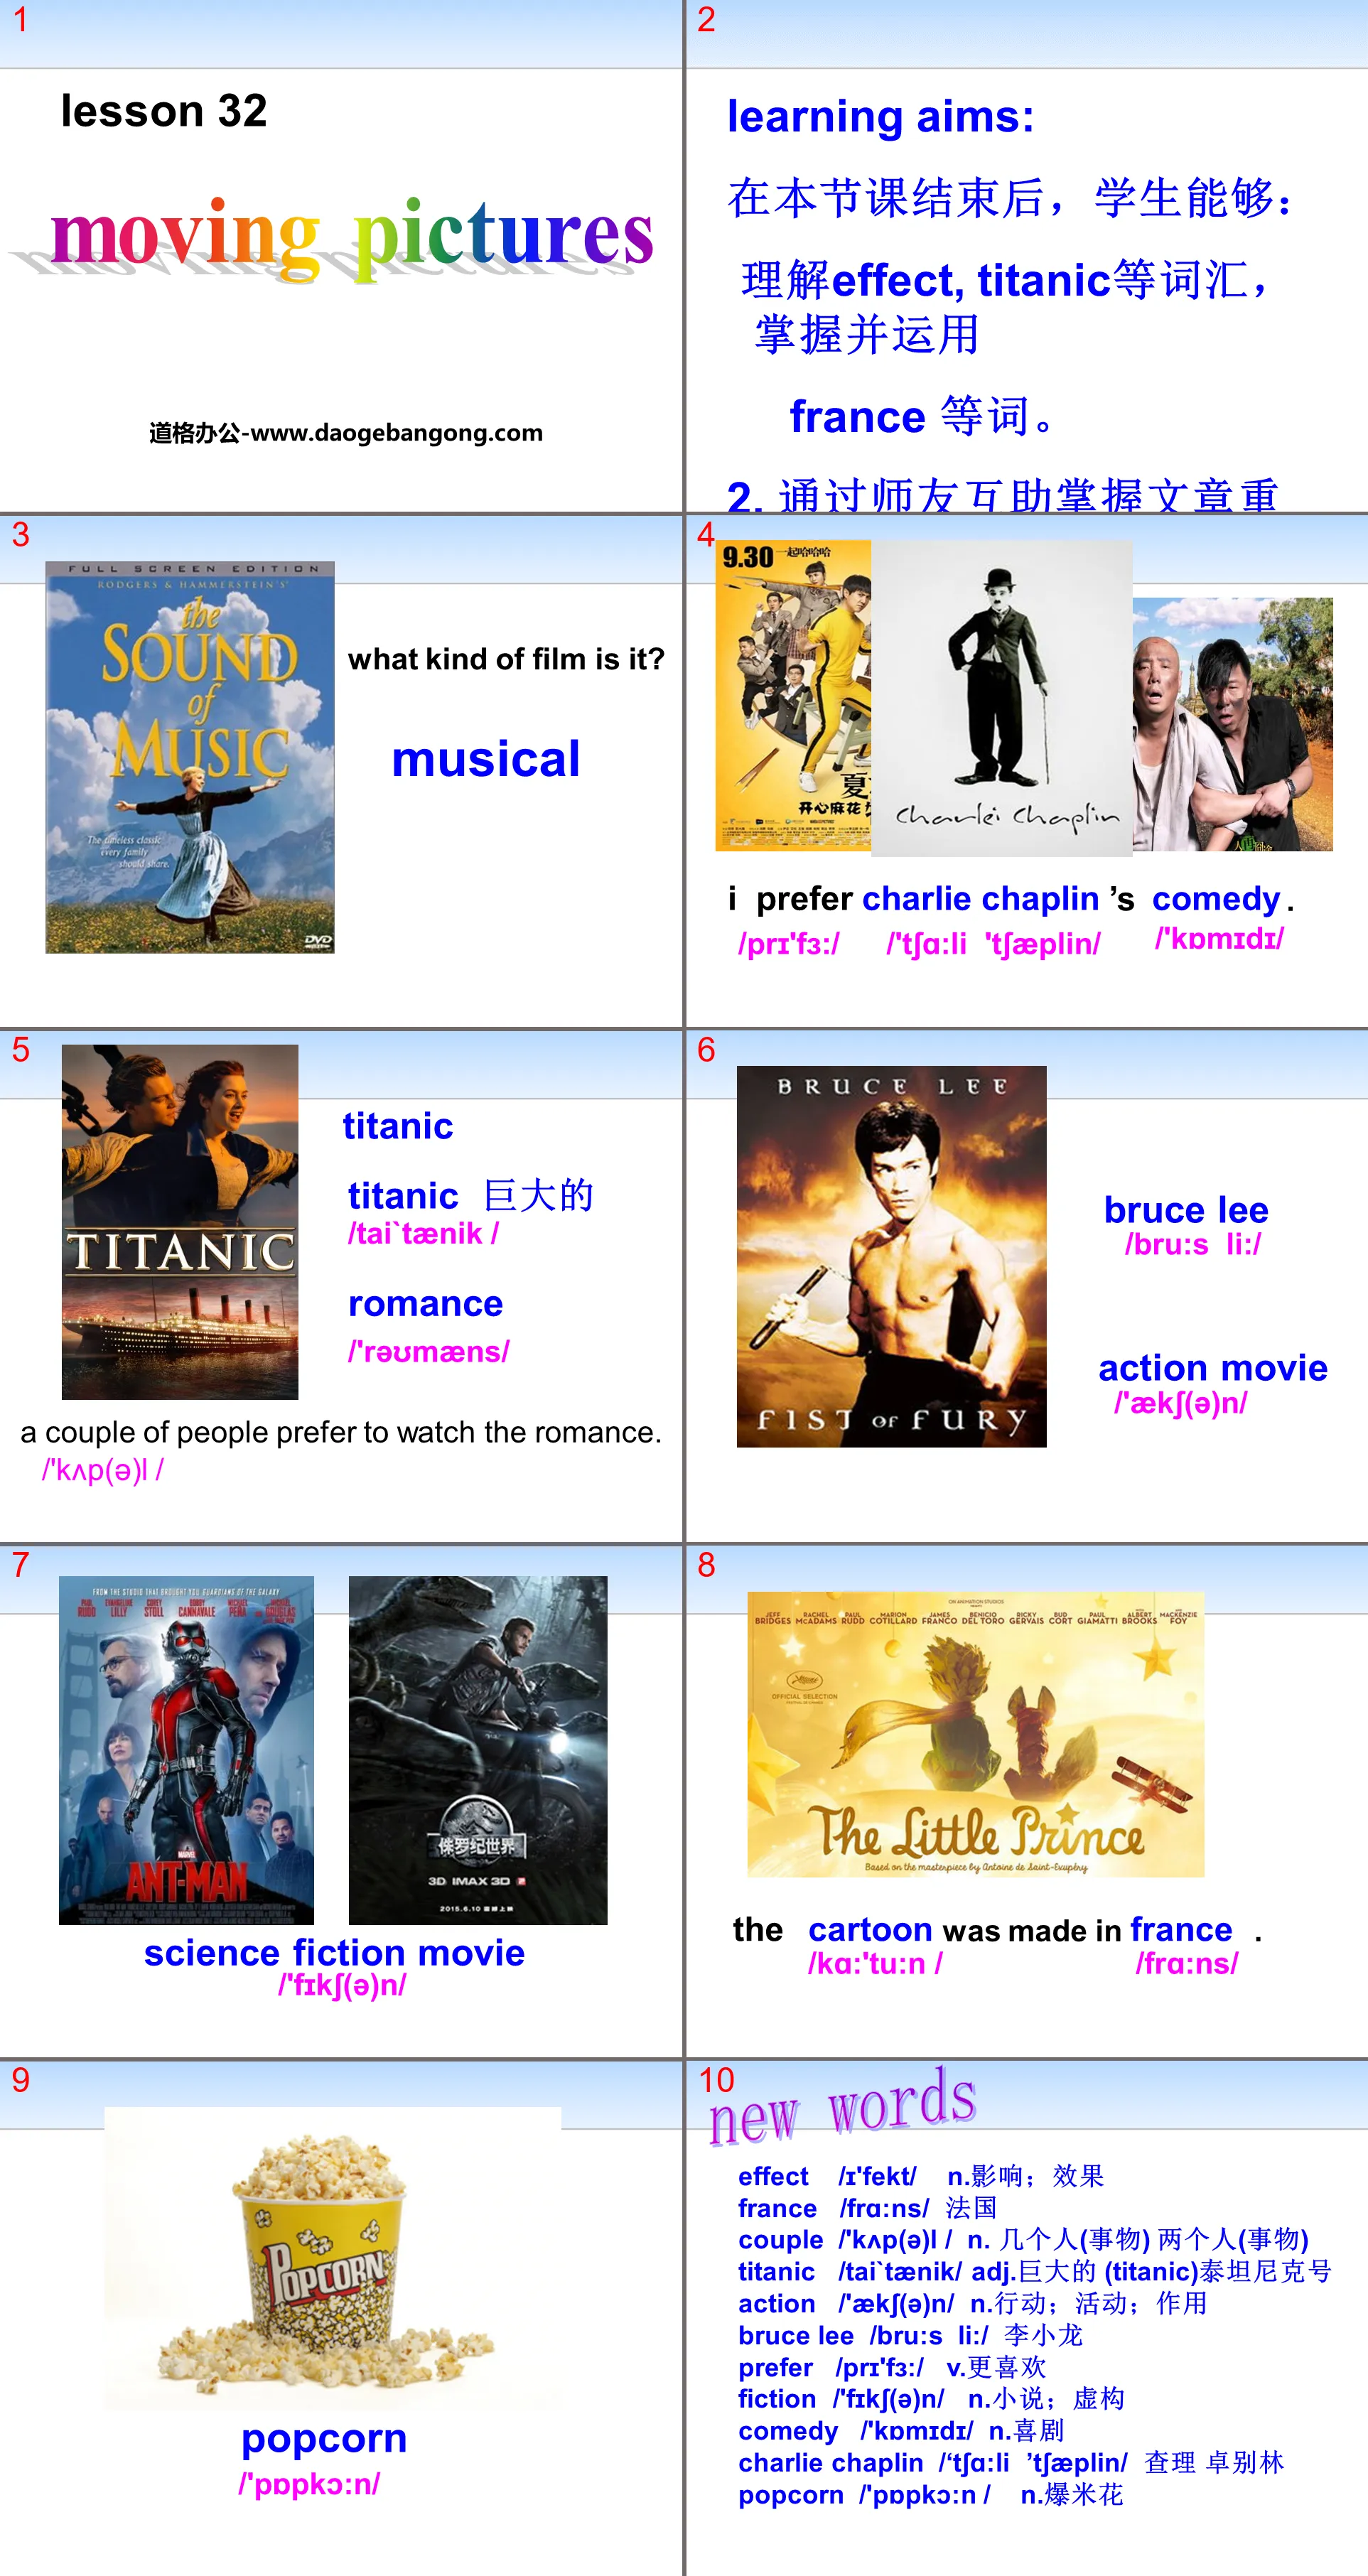 "Moving Pictures" Movies and Theater PPT